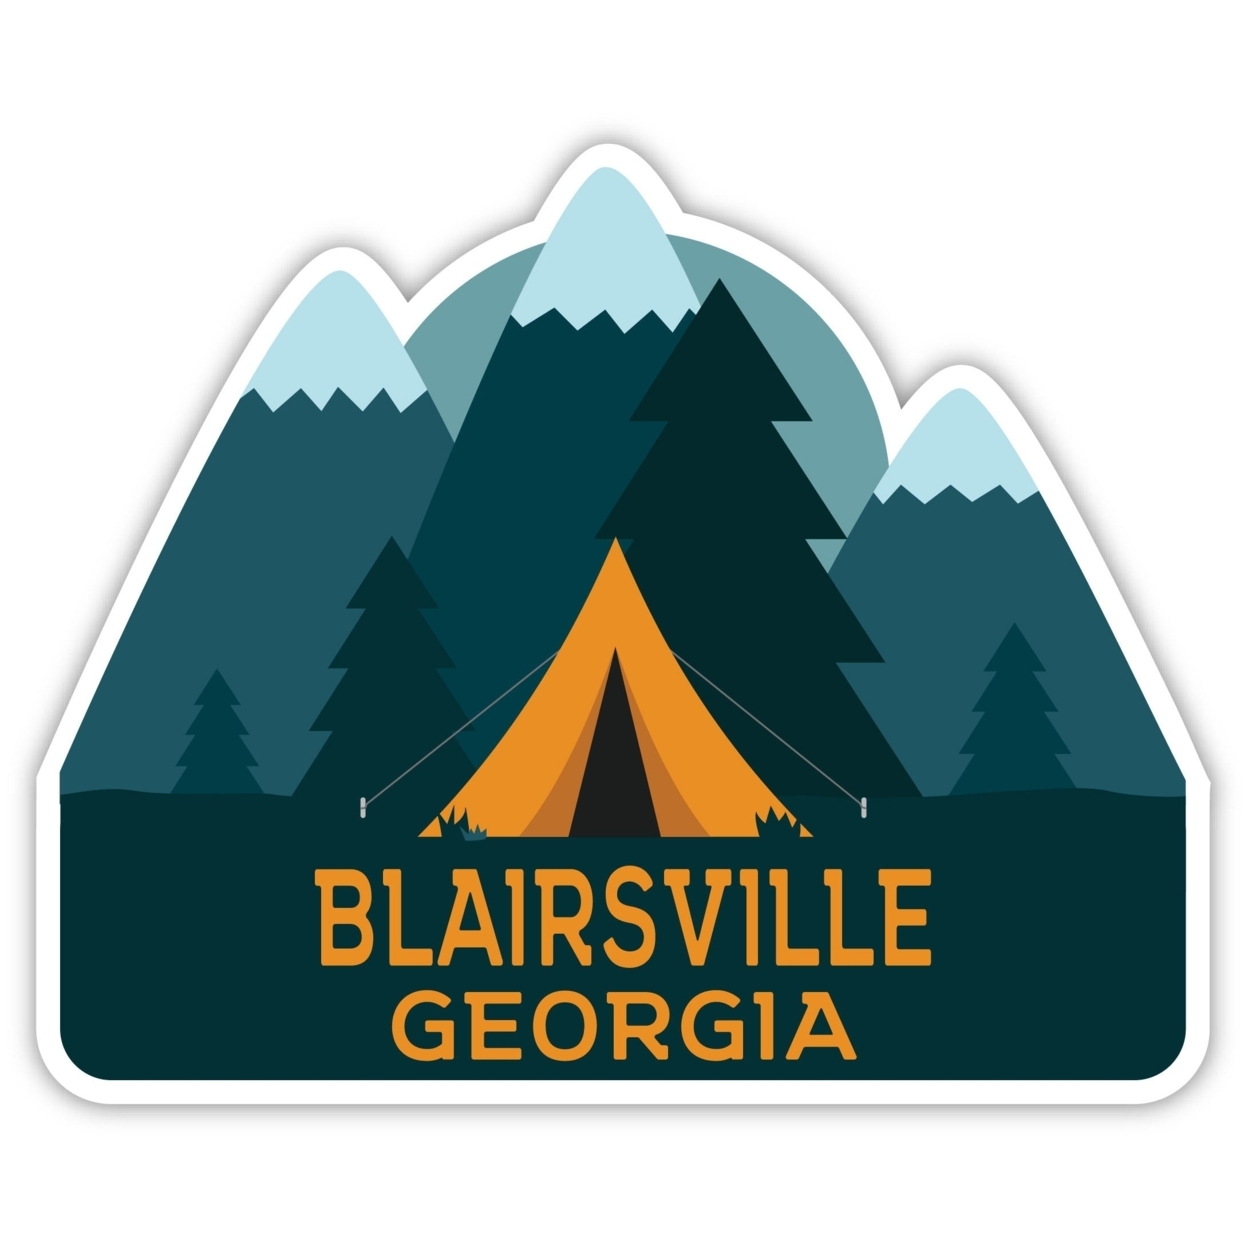 Blairsville Georgia Souvenir Decorative Stickers (Choose Theme And Size) - 4-Pack, 2-Inch, Tent